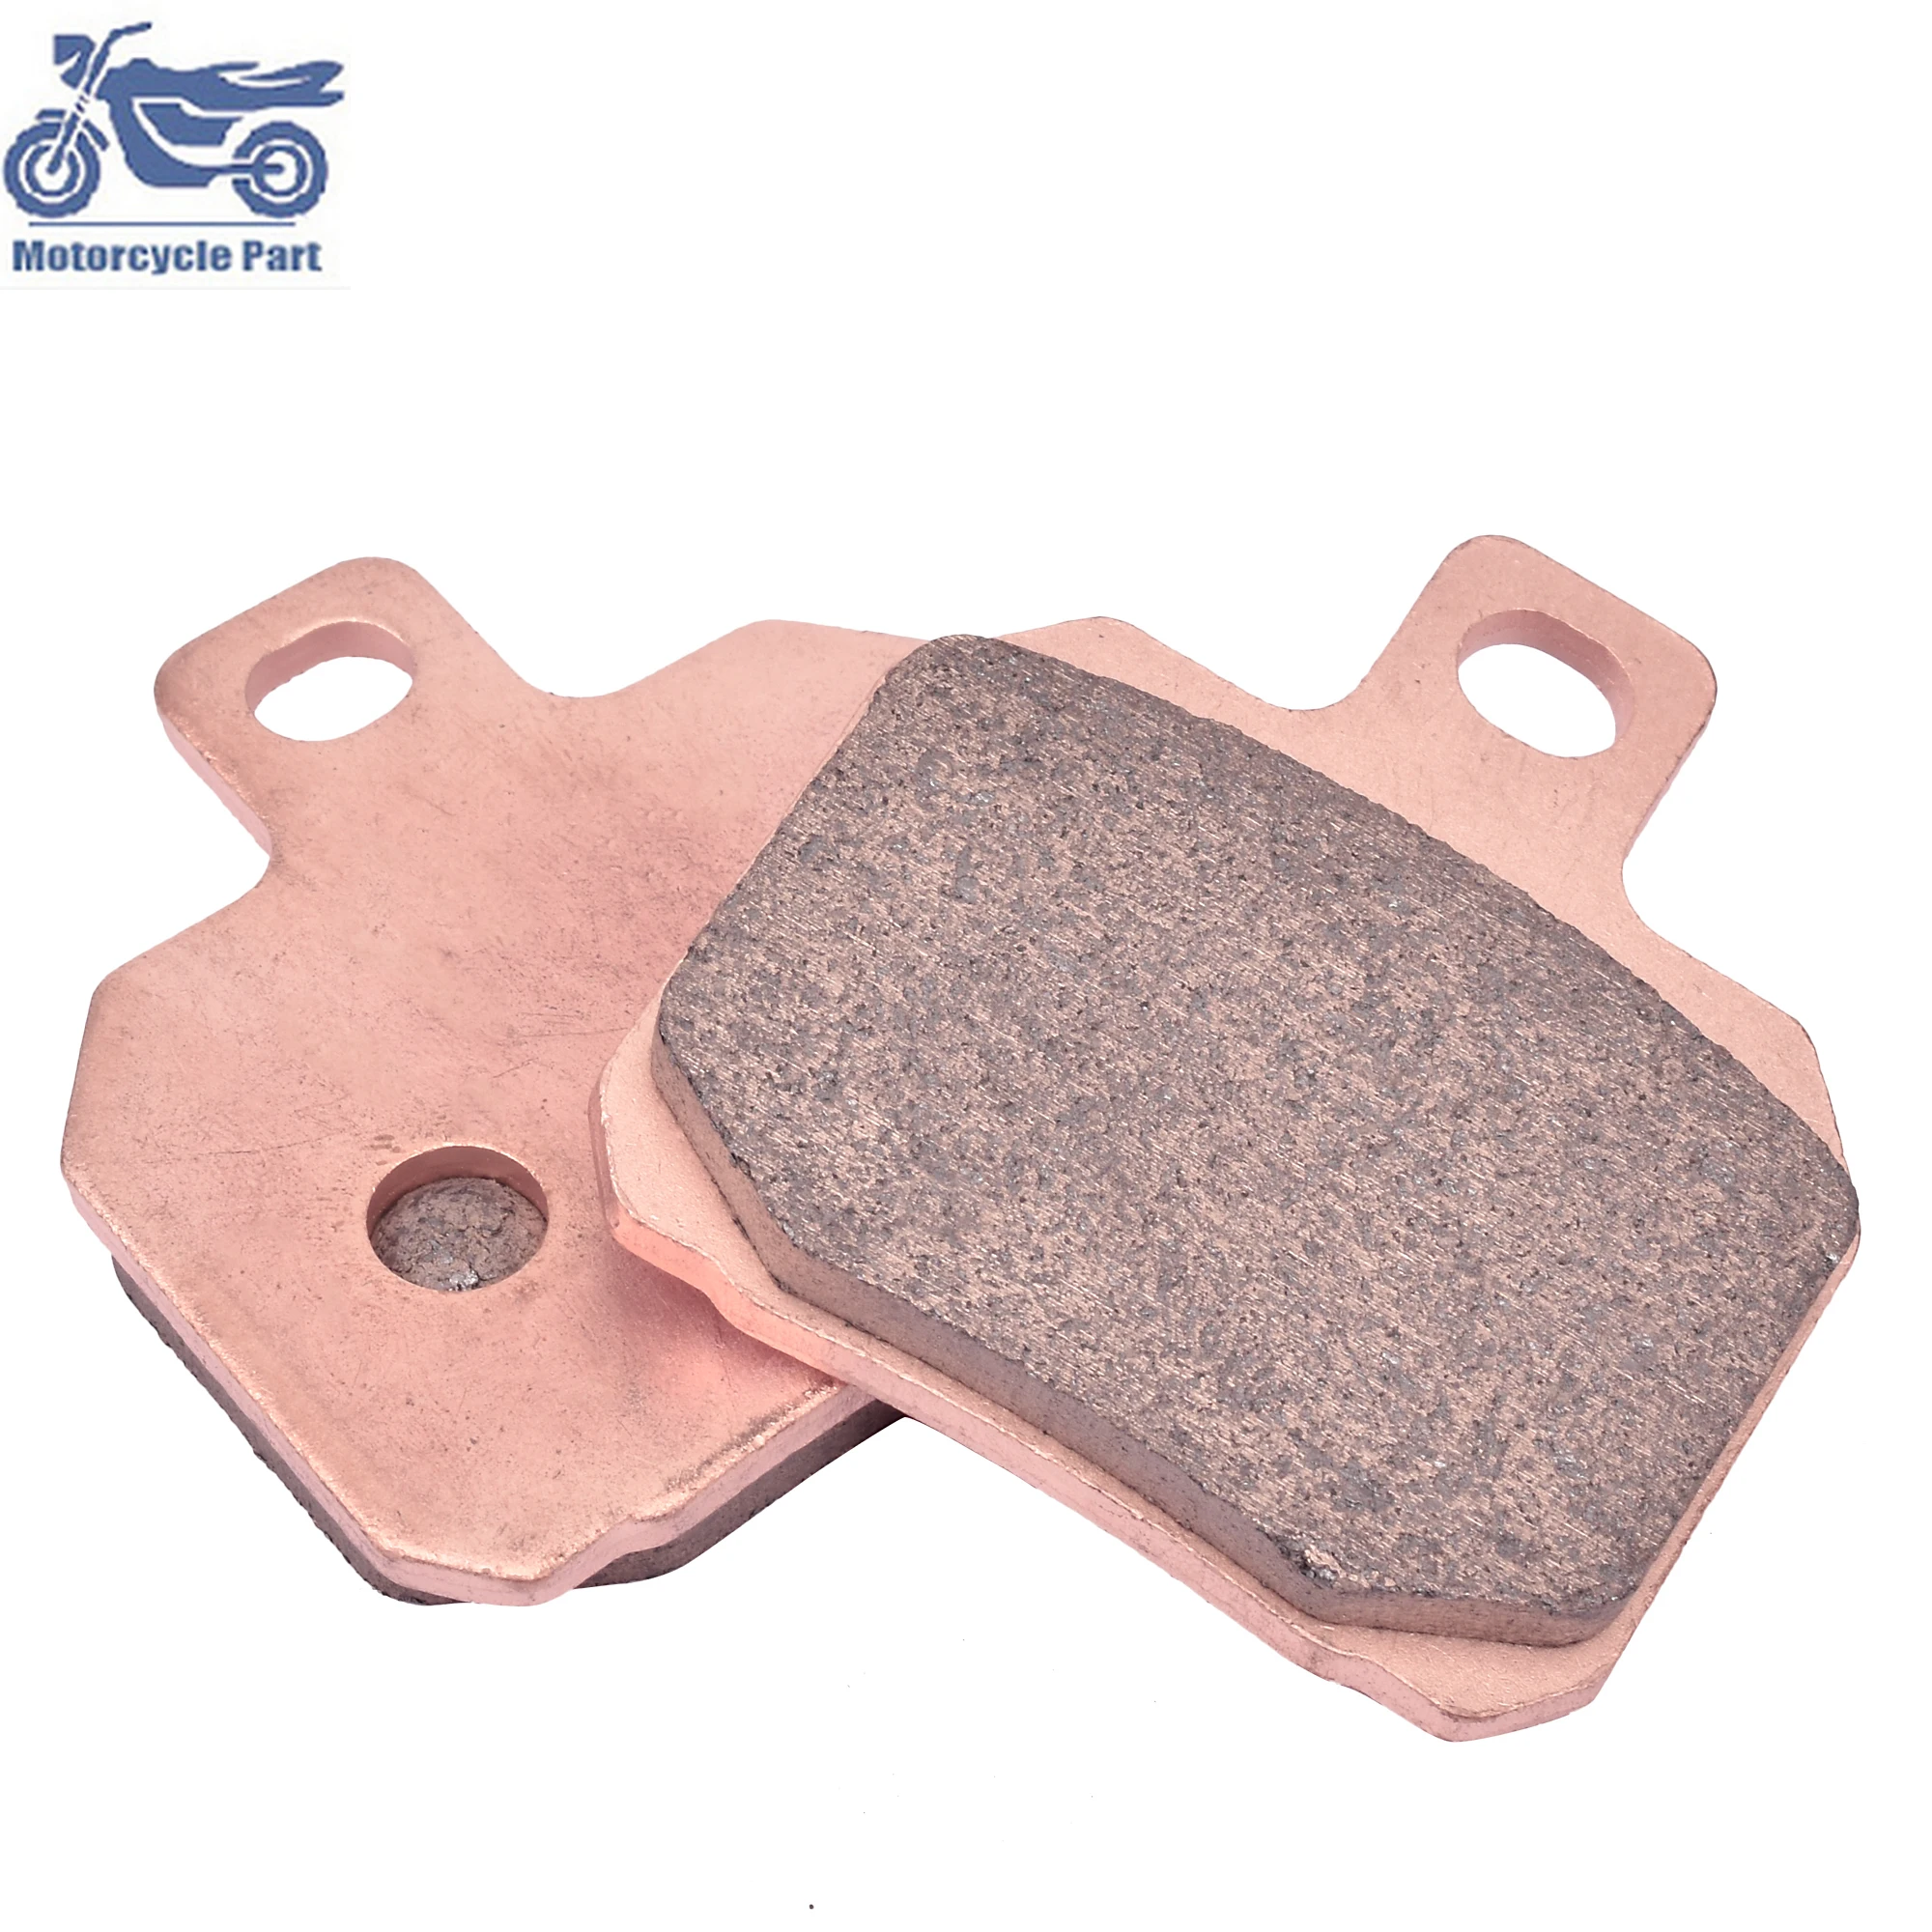 Sintered Brake Pads For Yamaha XQ 125 150 Maxster VP125 X-City YP180 R YP 125 YP125 Majesty R X-Max Sport XQ150 Maxter 2001-2019